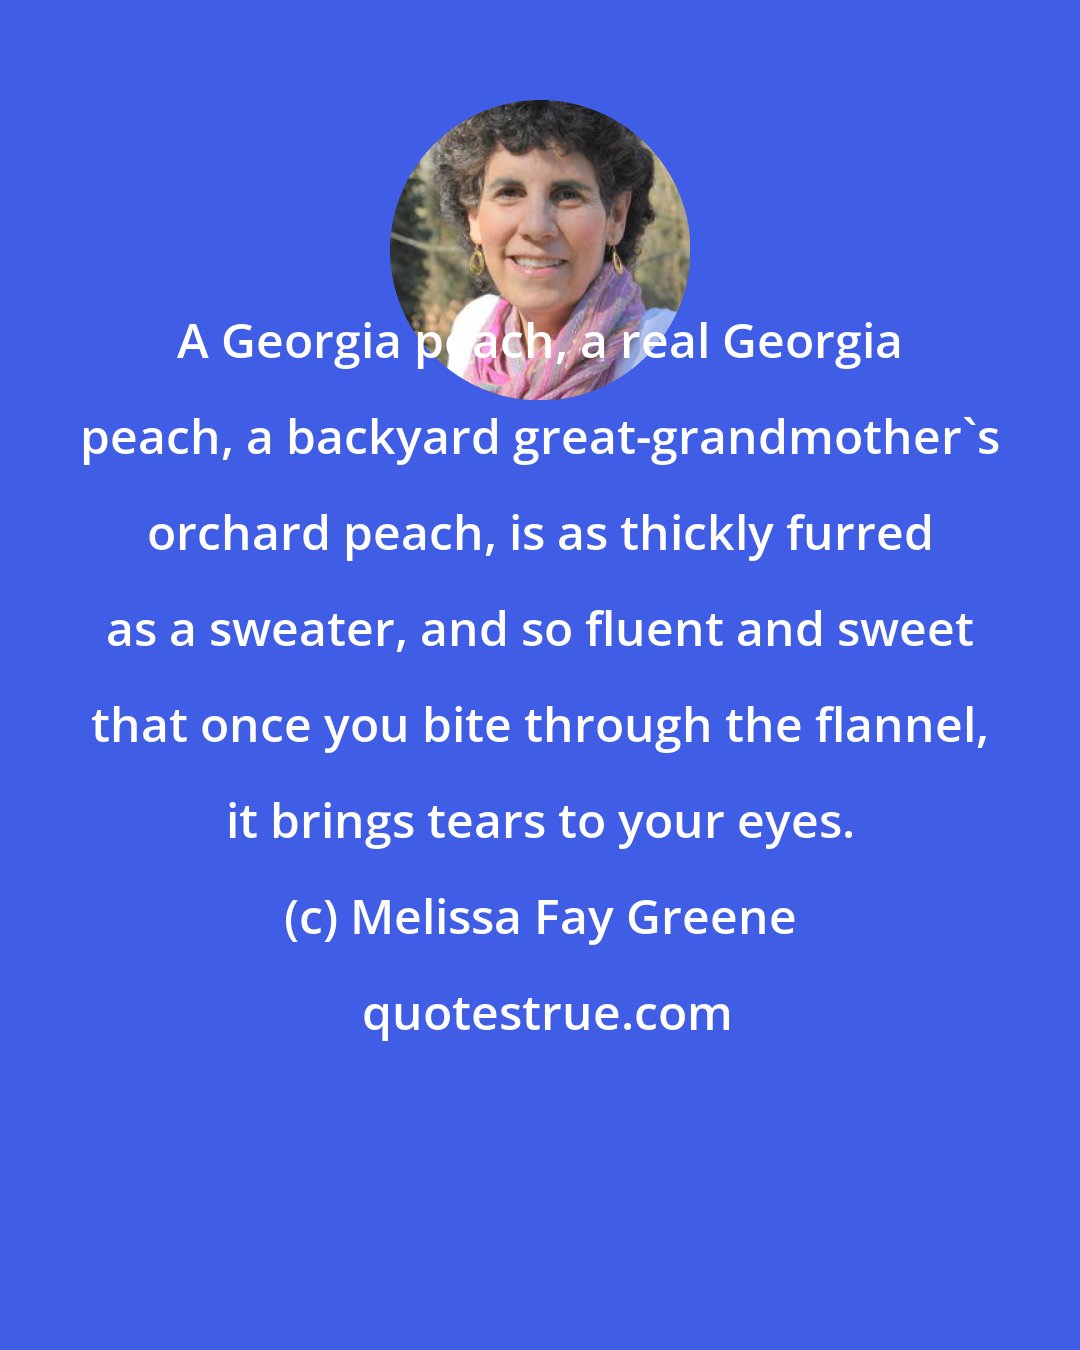 Melissa Fay Greene: A Georgia peach, a real Georgia peach, a backyard great-grandmother's orchard peach, is as thickly furred as a sweater, and so fluent and sweet that once you bite through the flannel, it brings tears to your eyes.